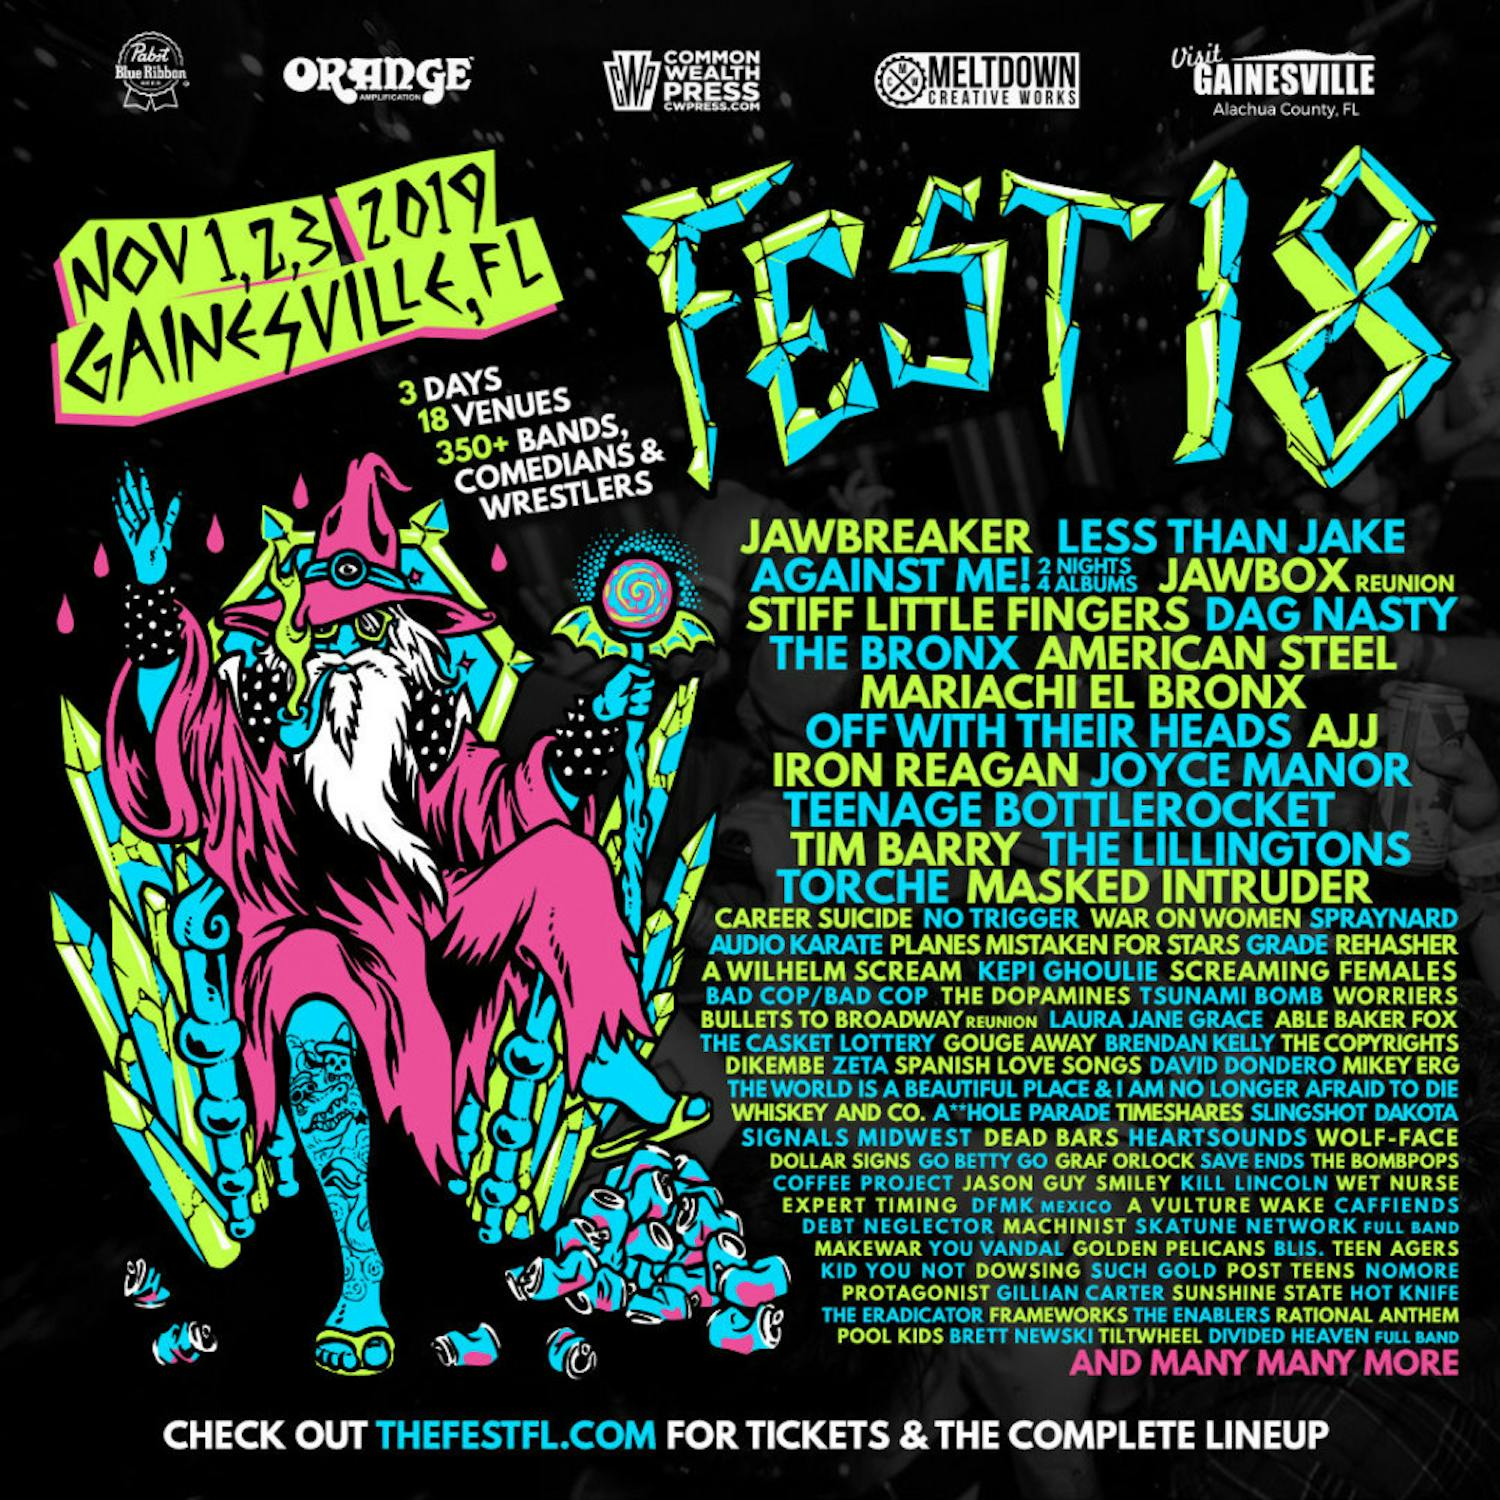 Fest is taking place in venues across Gainesville from Friday through Sunday.